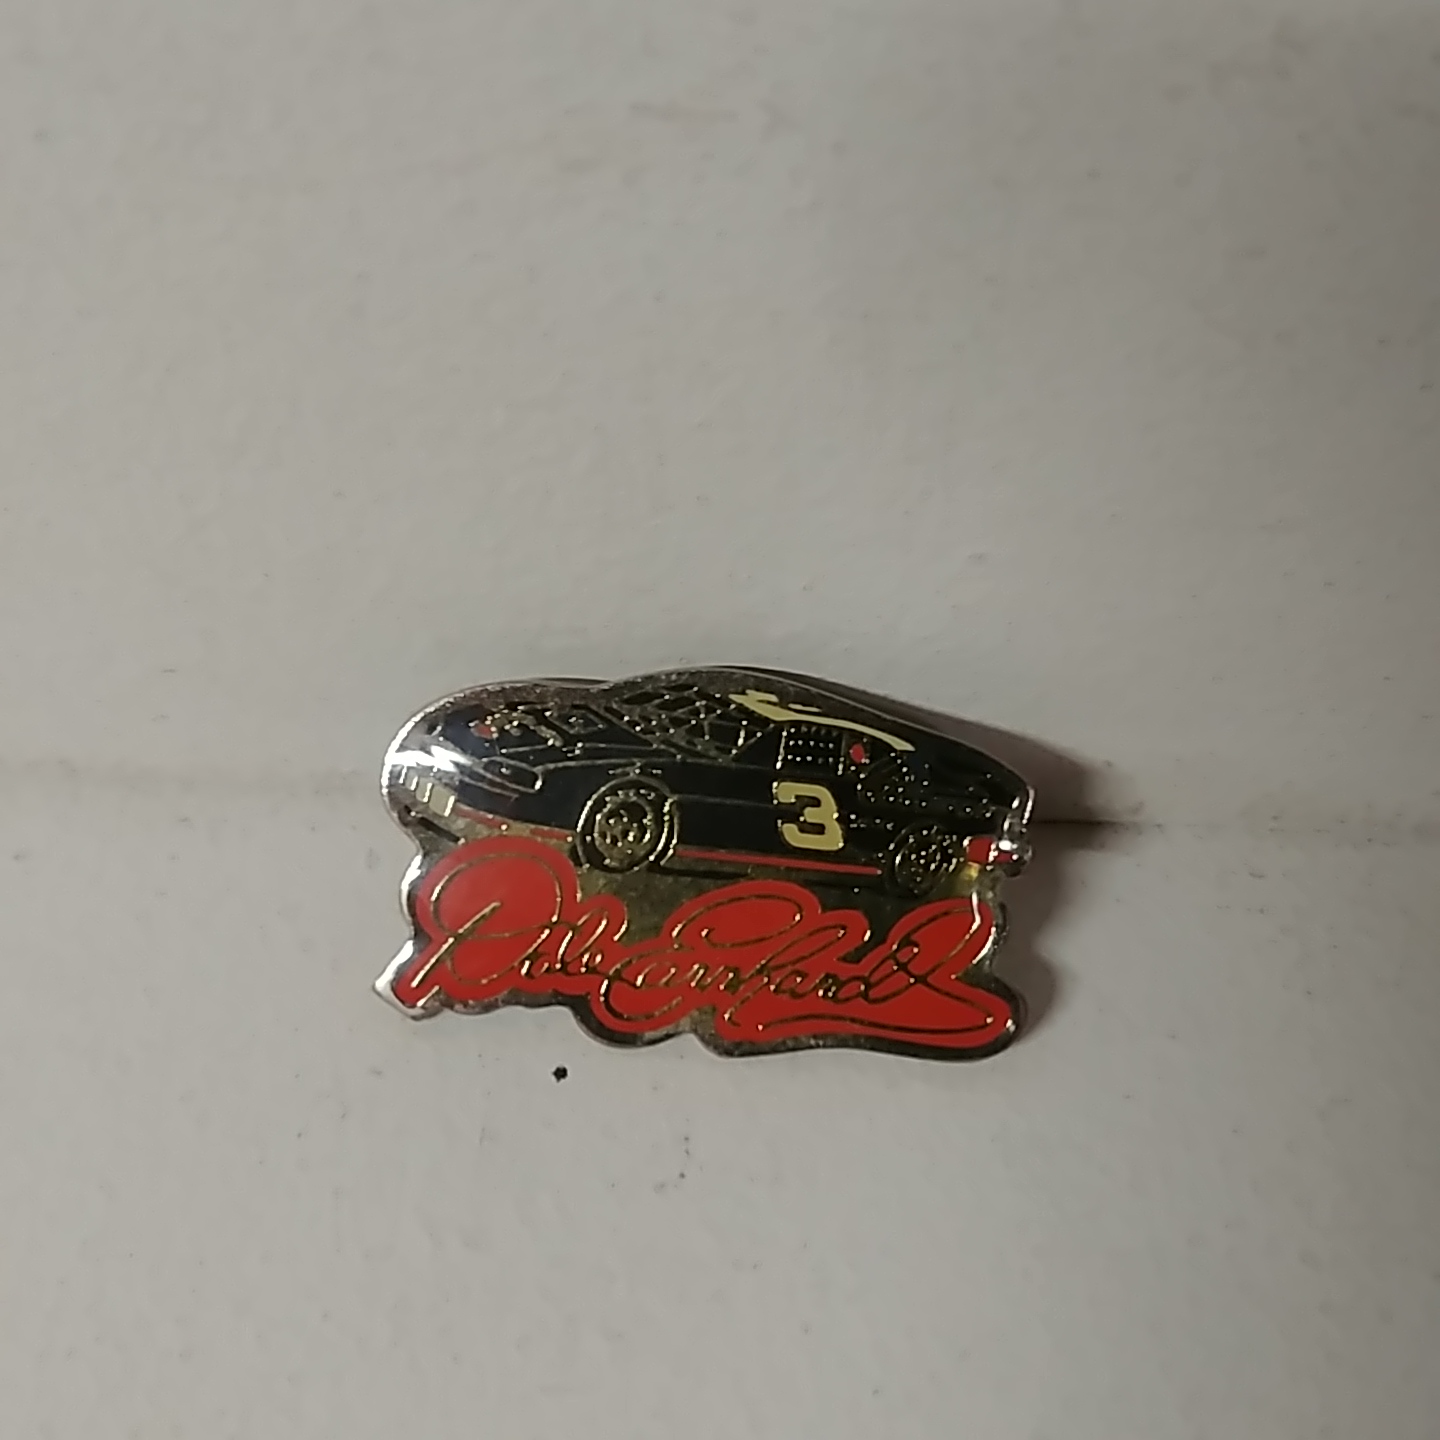 1995 Dale Earnhardt Goodwrench hat pin